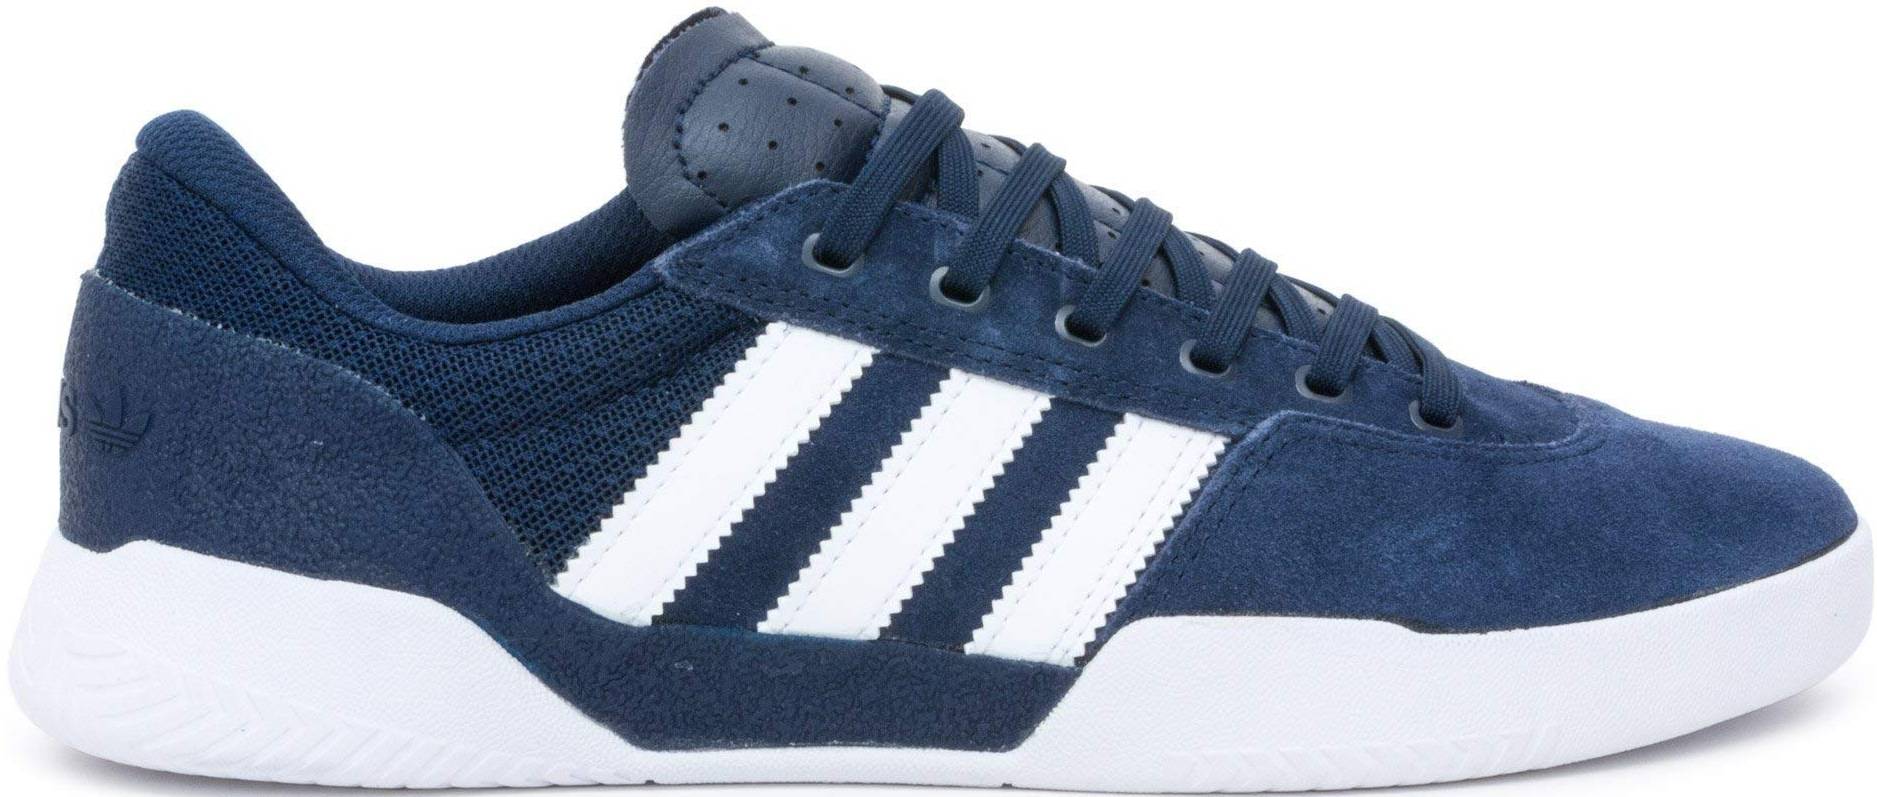 Only $40 + Review of Adidas City Cup 